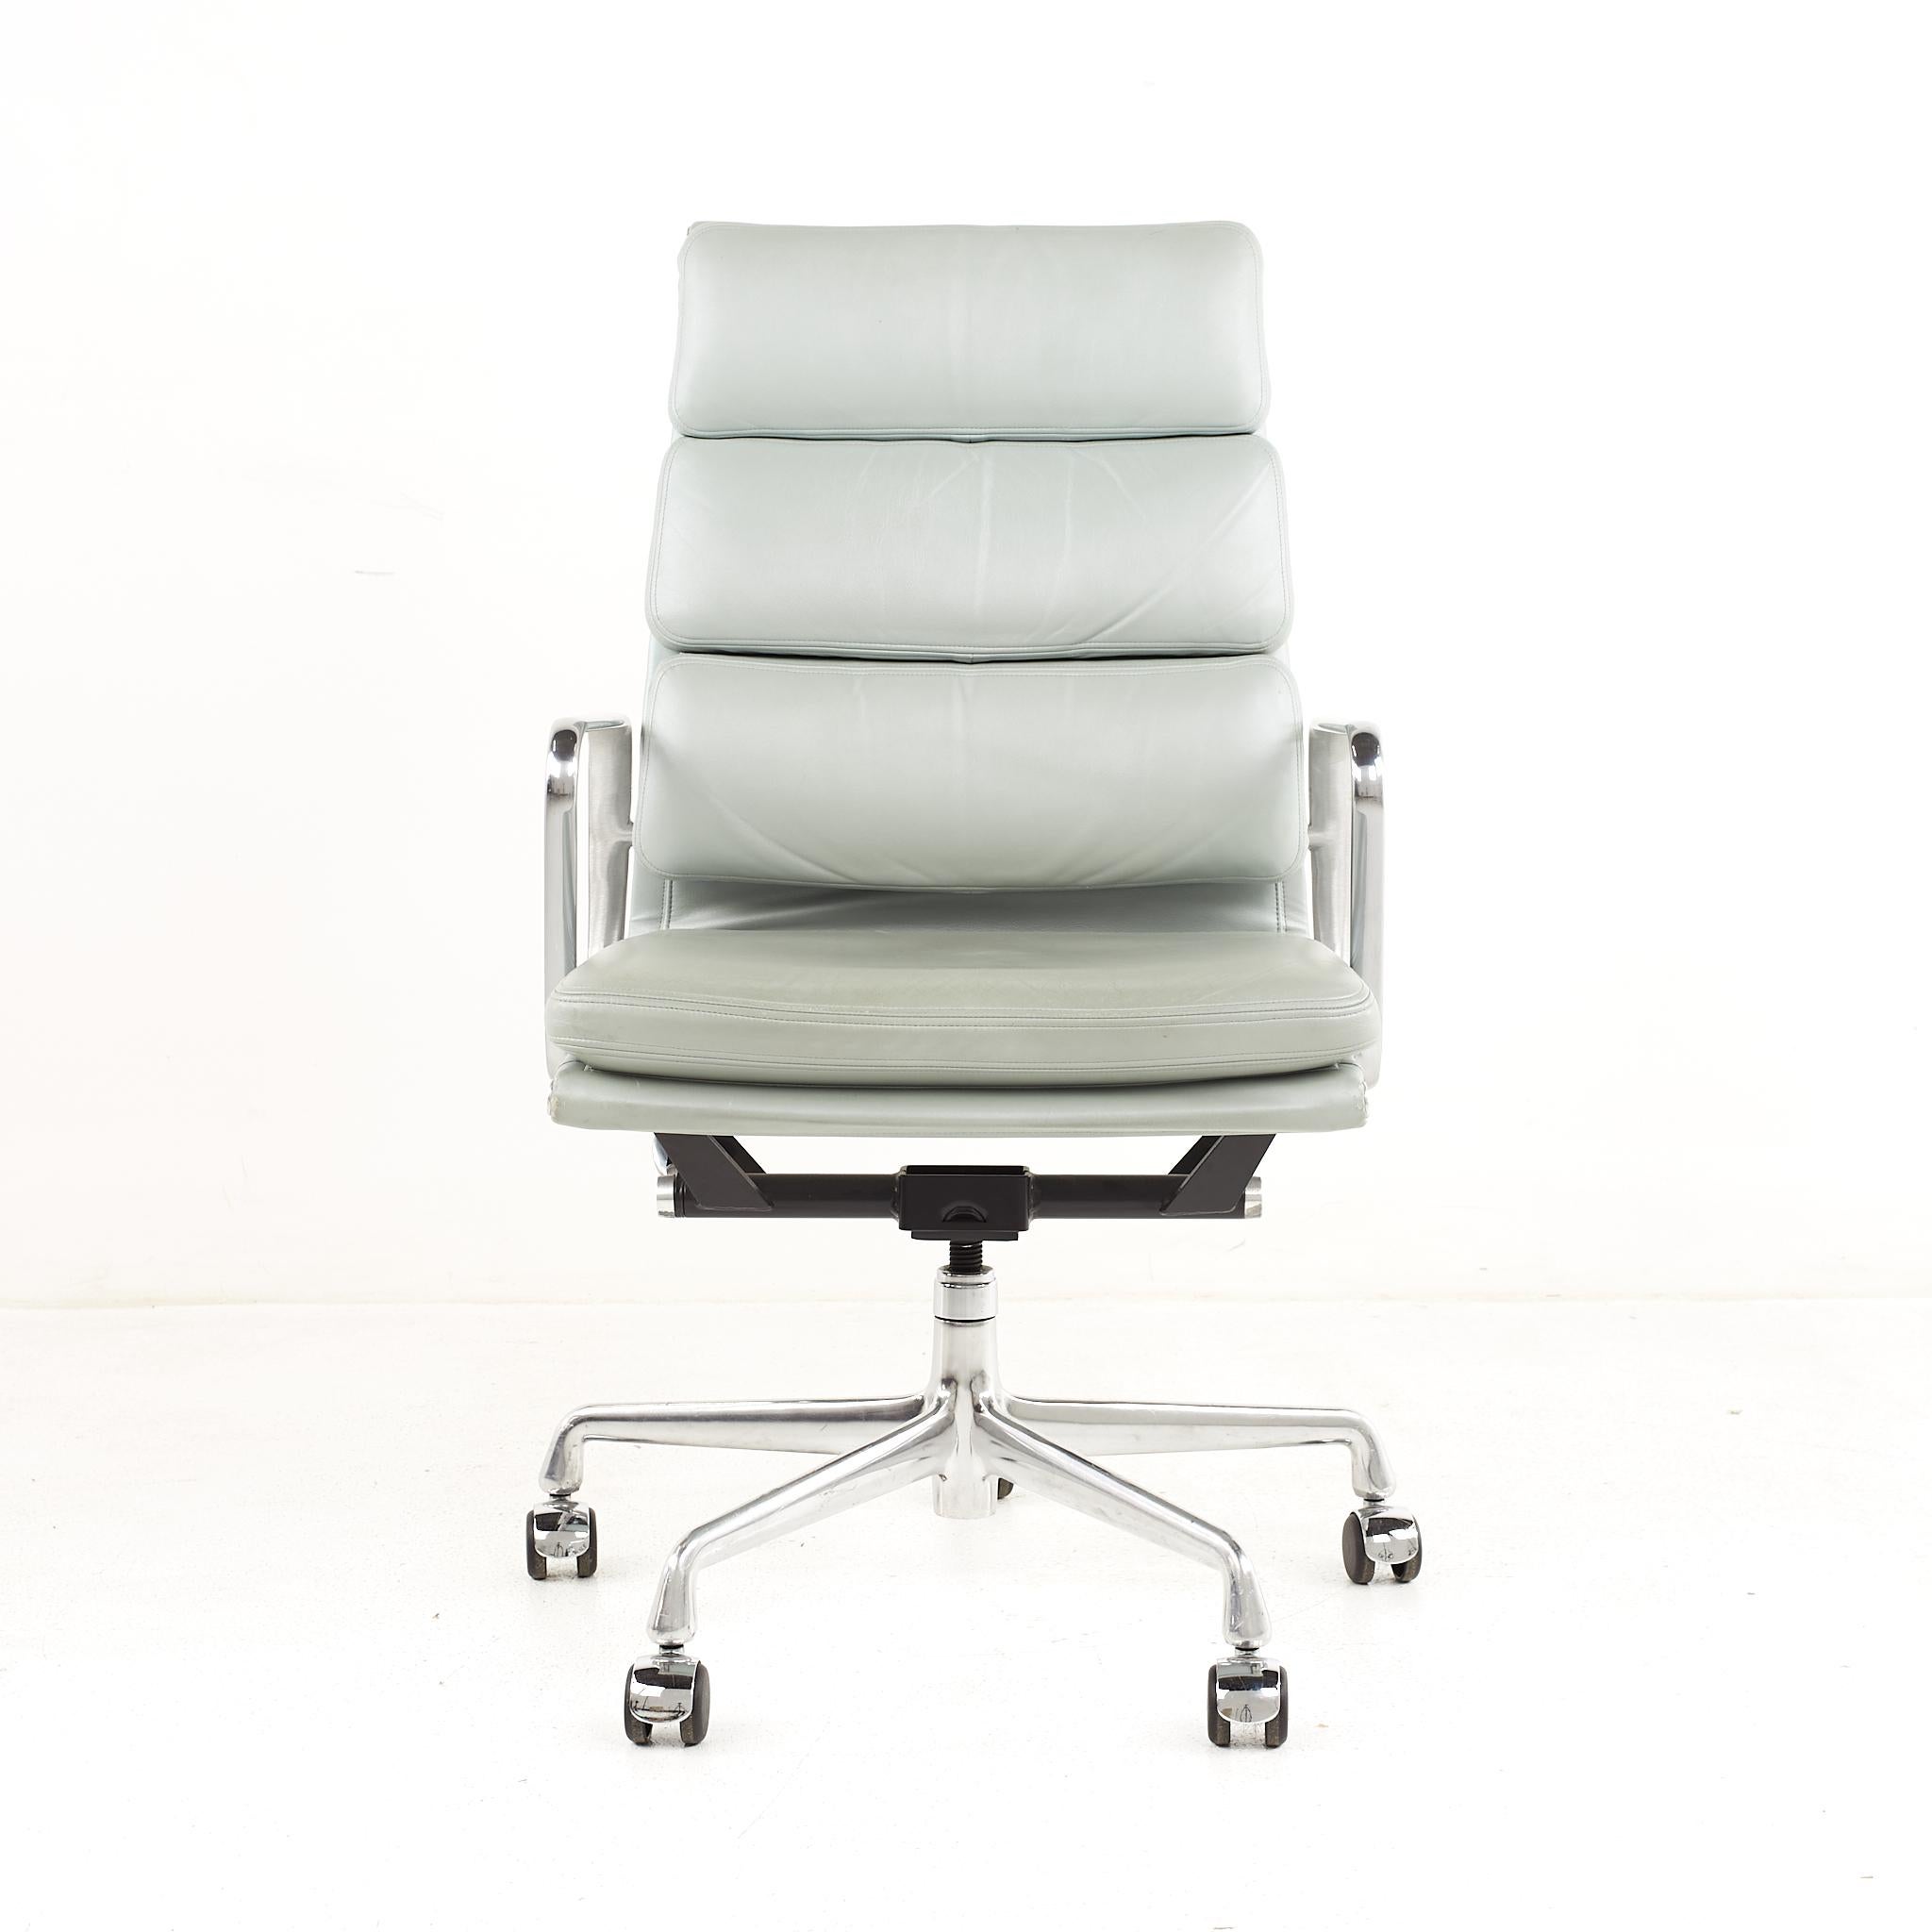 Eames mid-century soft pad chair.

The chair measures: 22 wide x 20.5 deep x 39.5 high, with a seat height of 19.5 inches and arm height of 25.25 inches

All pieces of furniture can be had in what we call restored vintage condition. That means